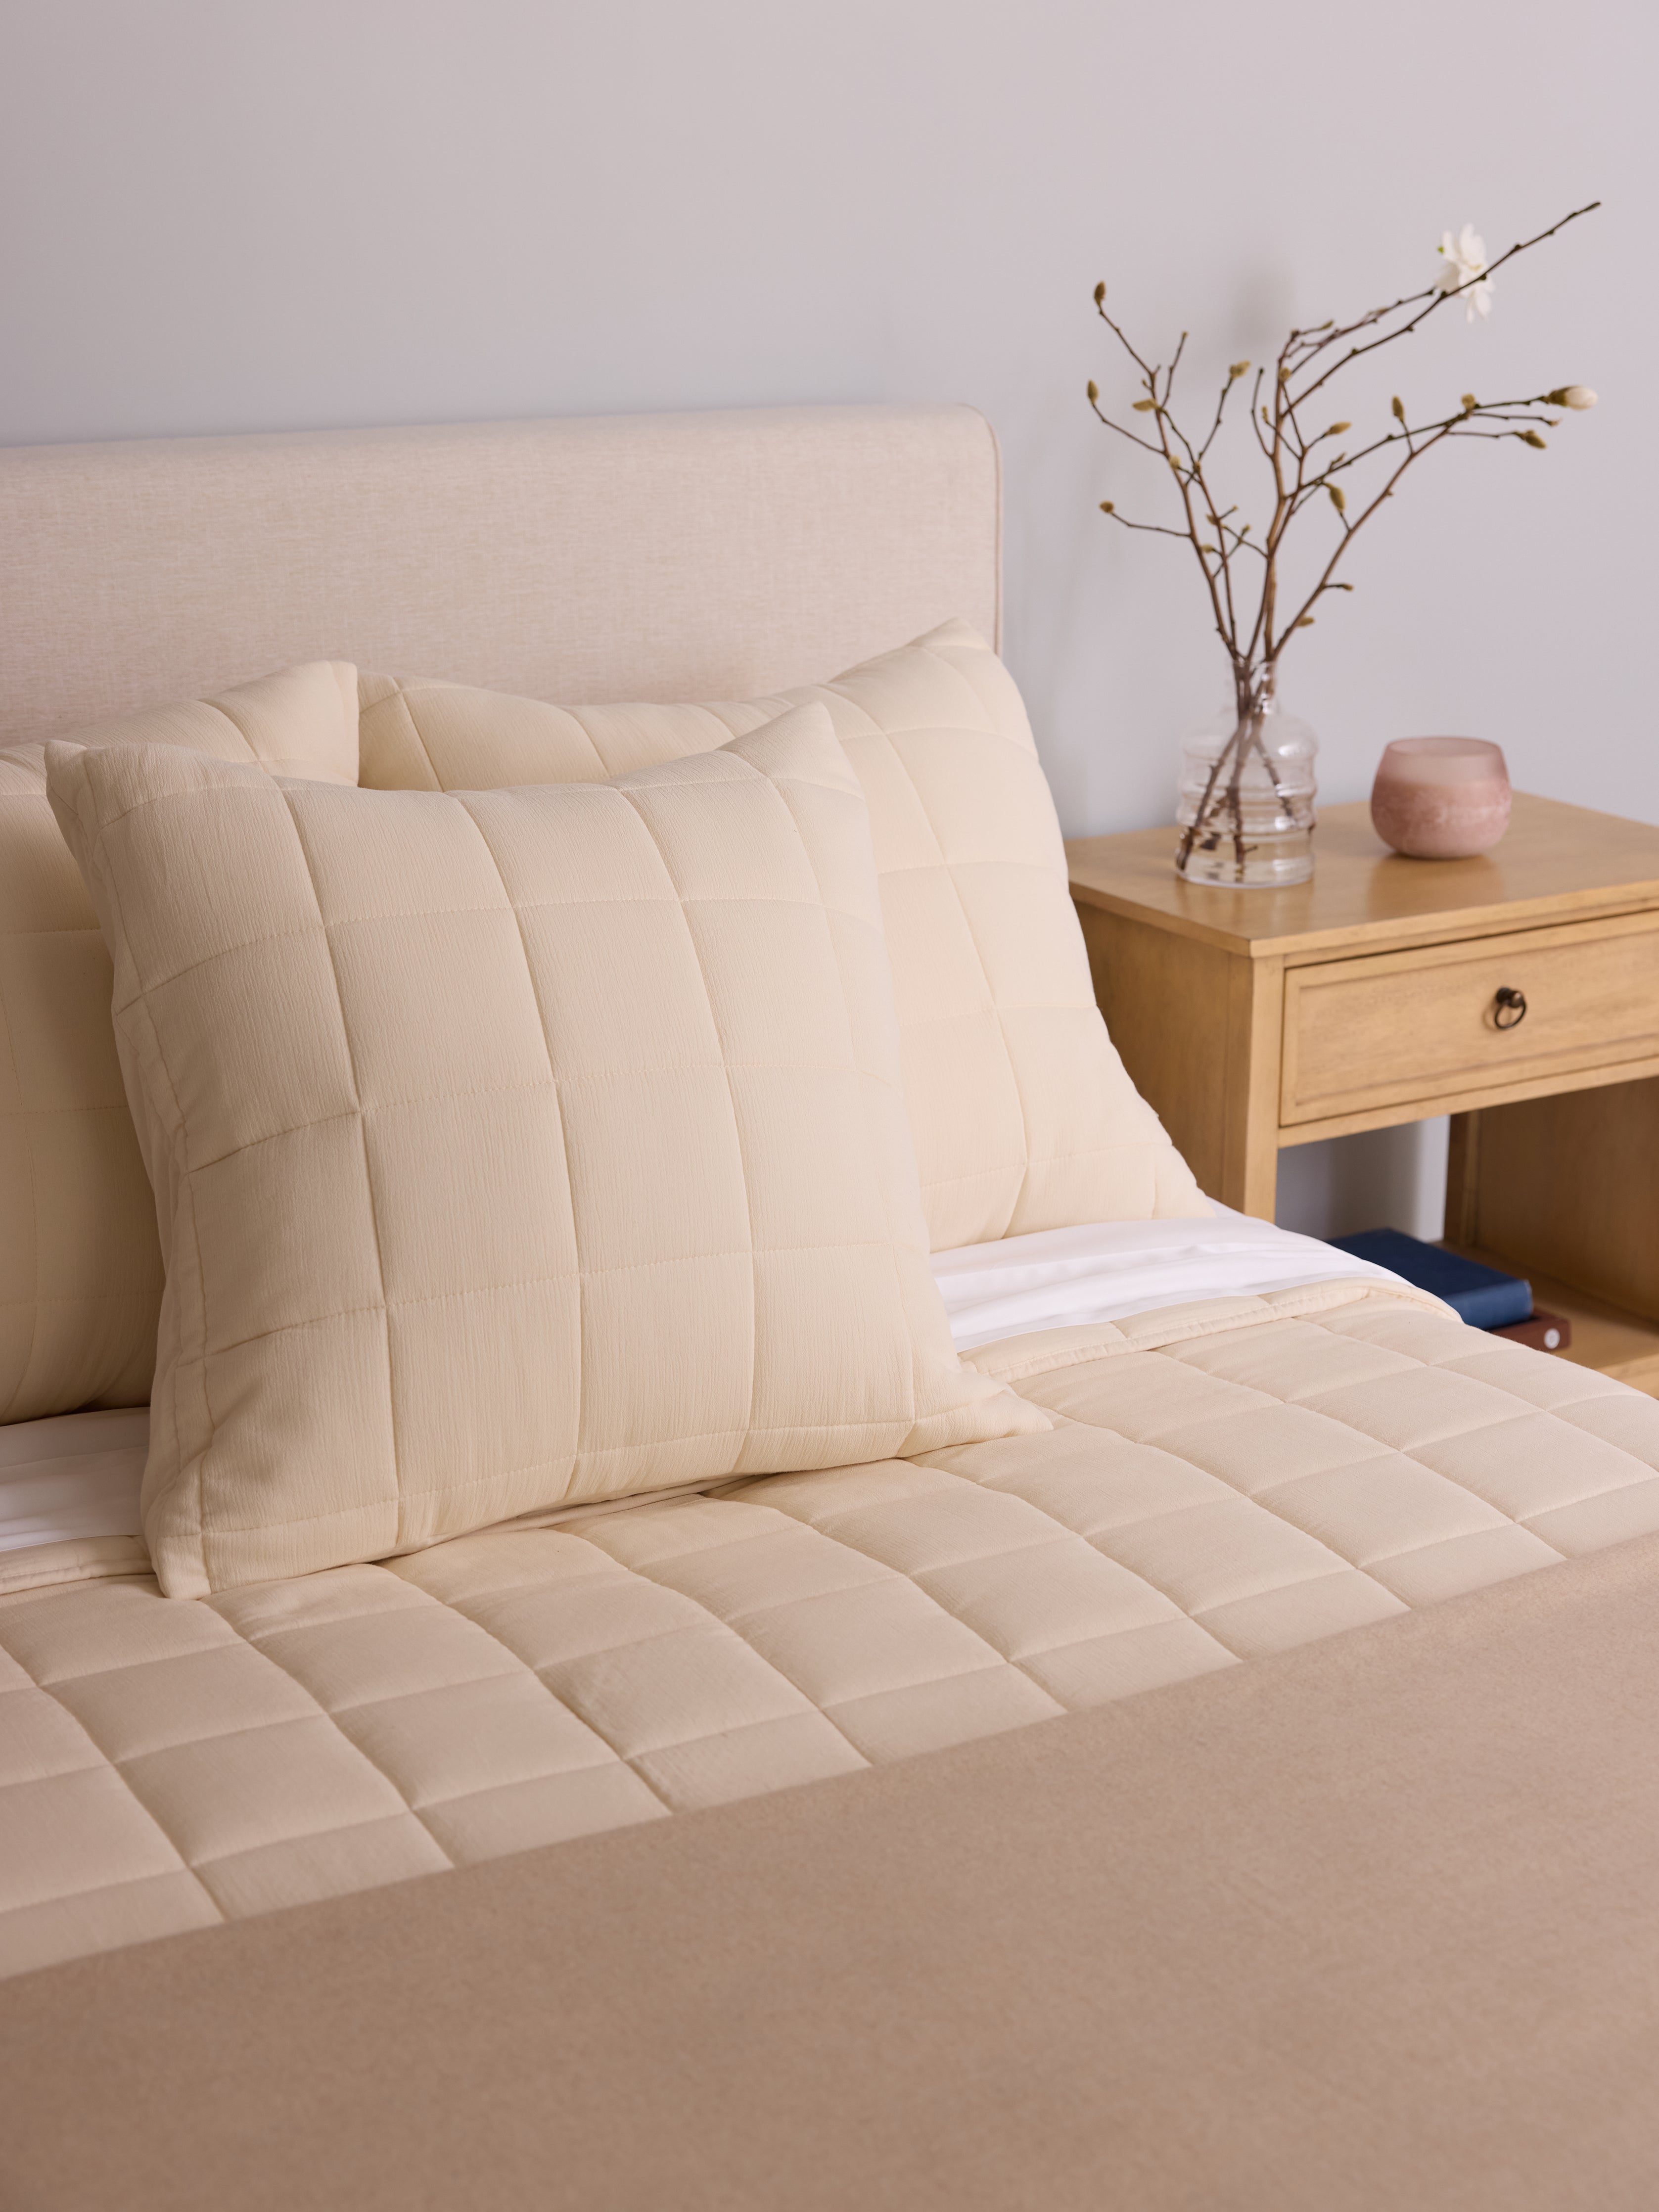 Buttermilk Aire Bamboo Box Quilt Euro Sham. The sham is resting on a bed in a bedroom|Color:Buttermilk|Style:Euro